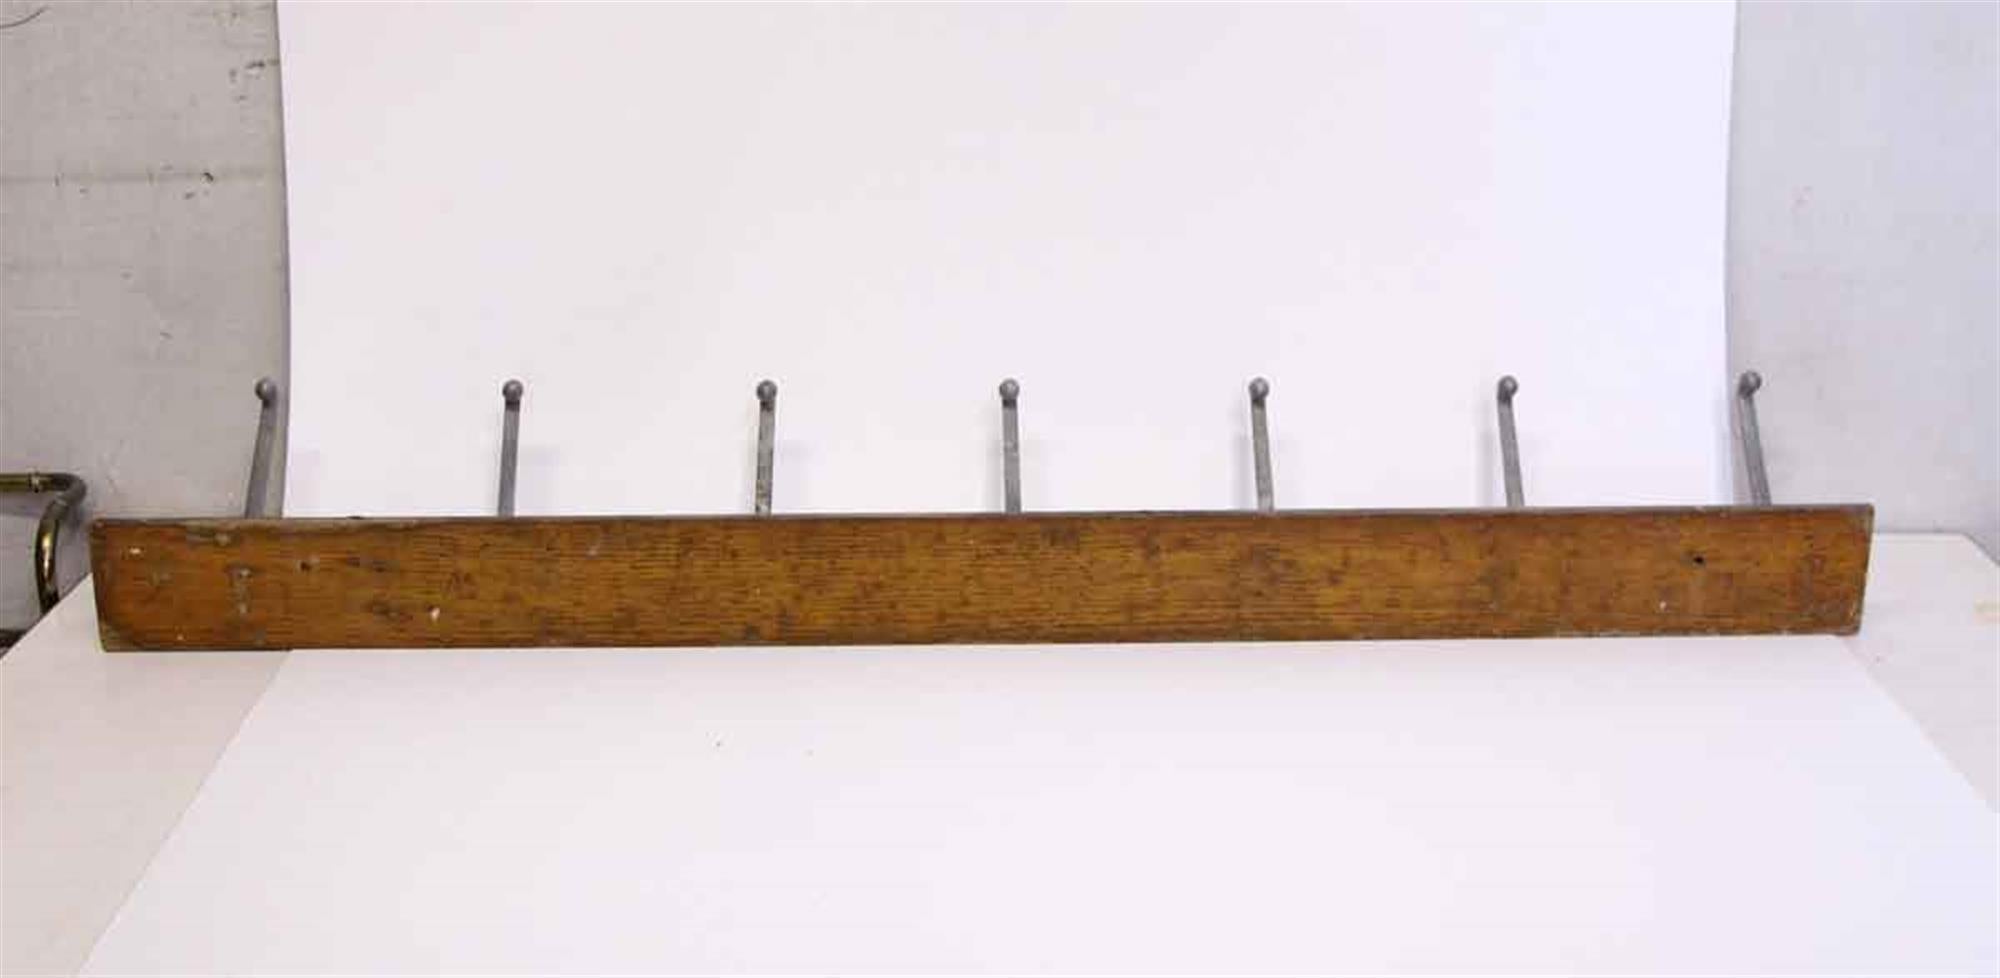 Late 20th Century 1990s Belgium Wall Mounted Coat Rack with Seven Hooks on a Wooden Plank